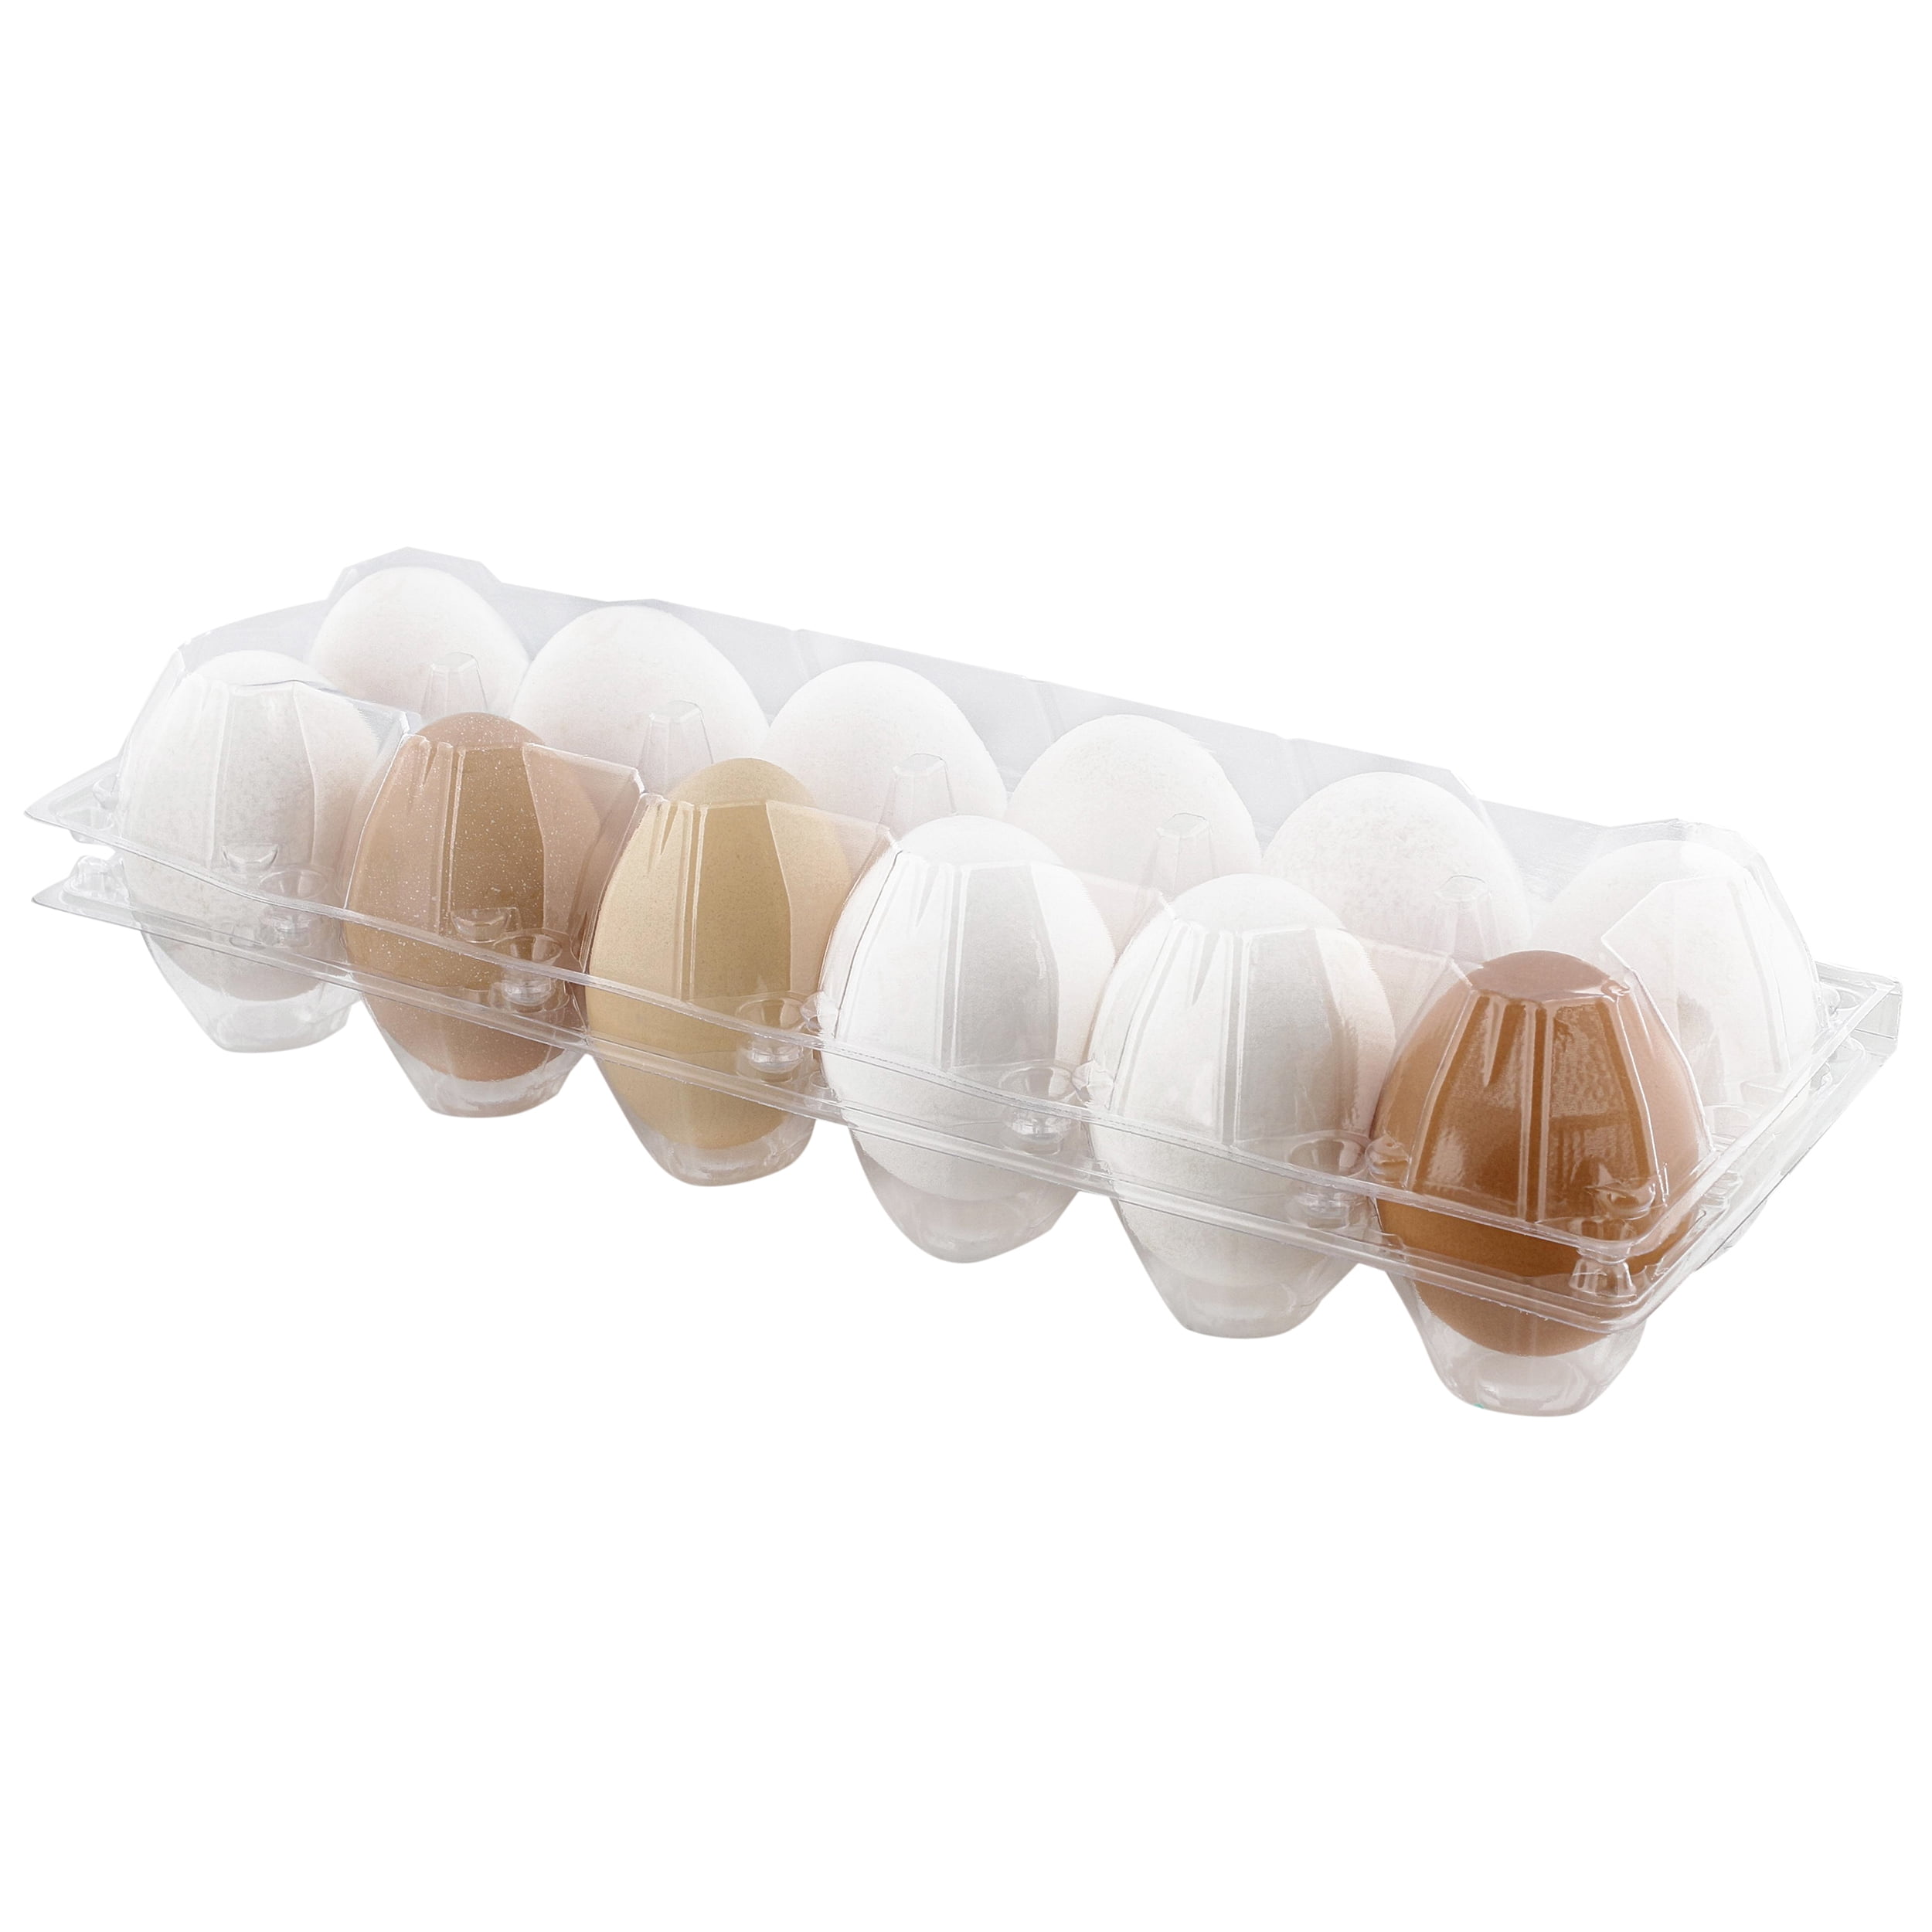 Clear Plastic Egg Carton, 12 Egg Holder Carrying Case with Handle - On Sale  - Bed Bath & Beyond - 20684476